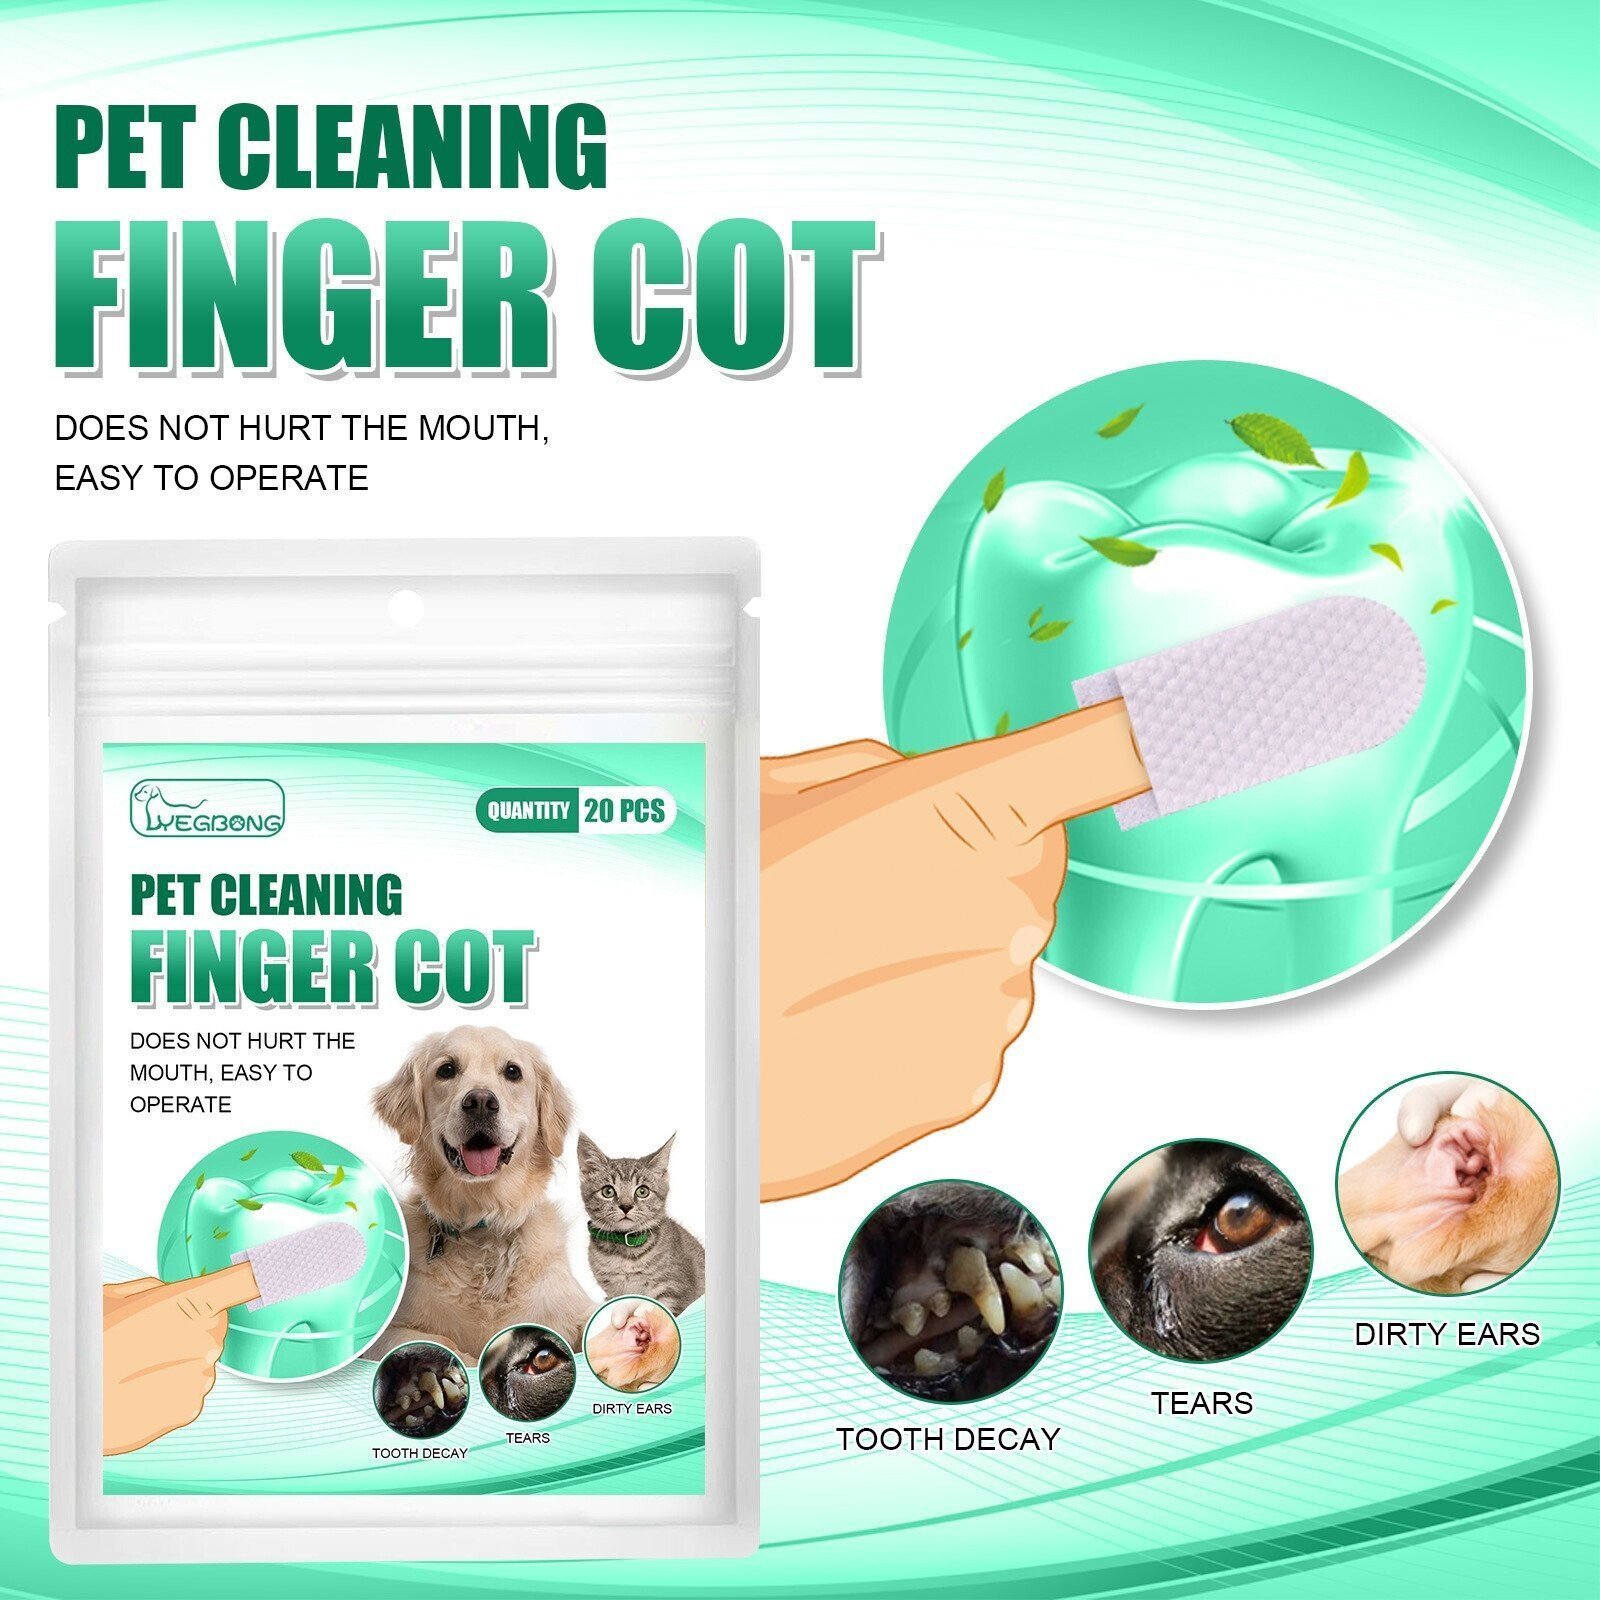 PET CLEANING FINGER COT